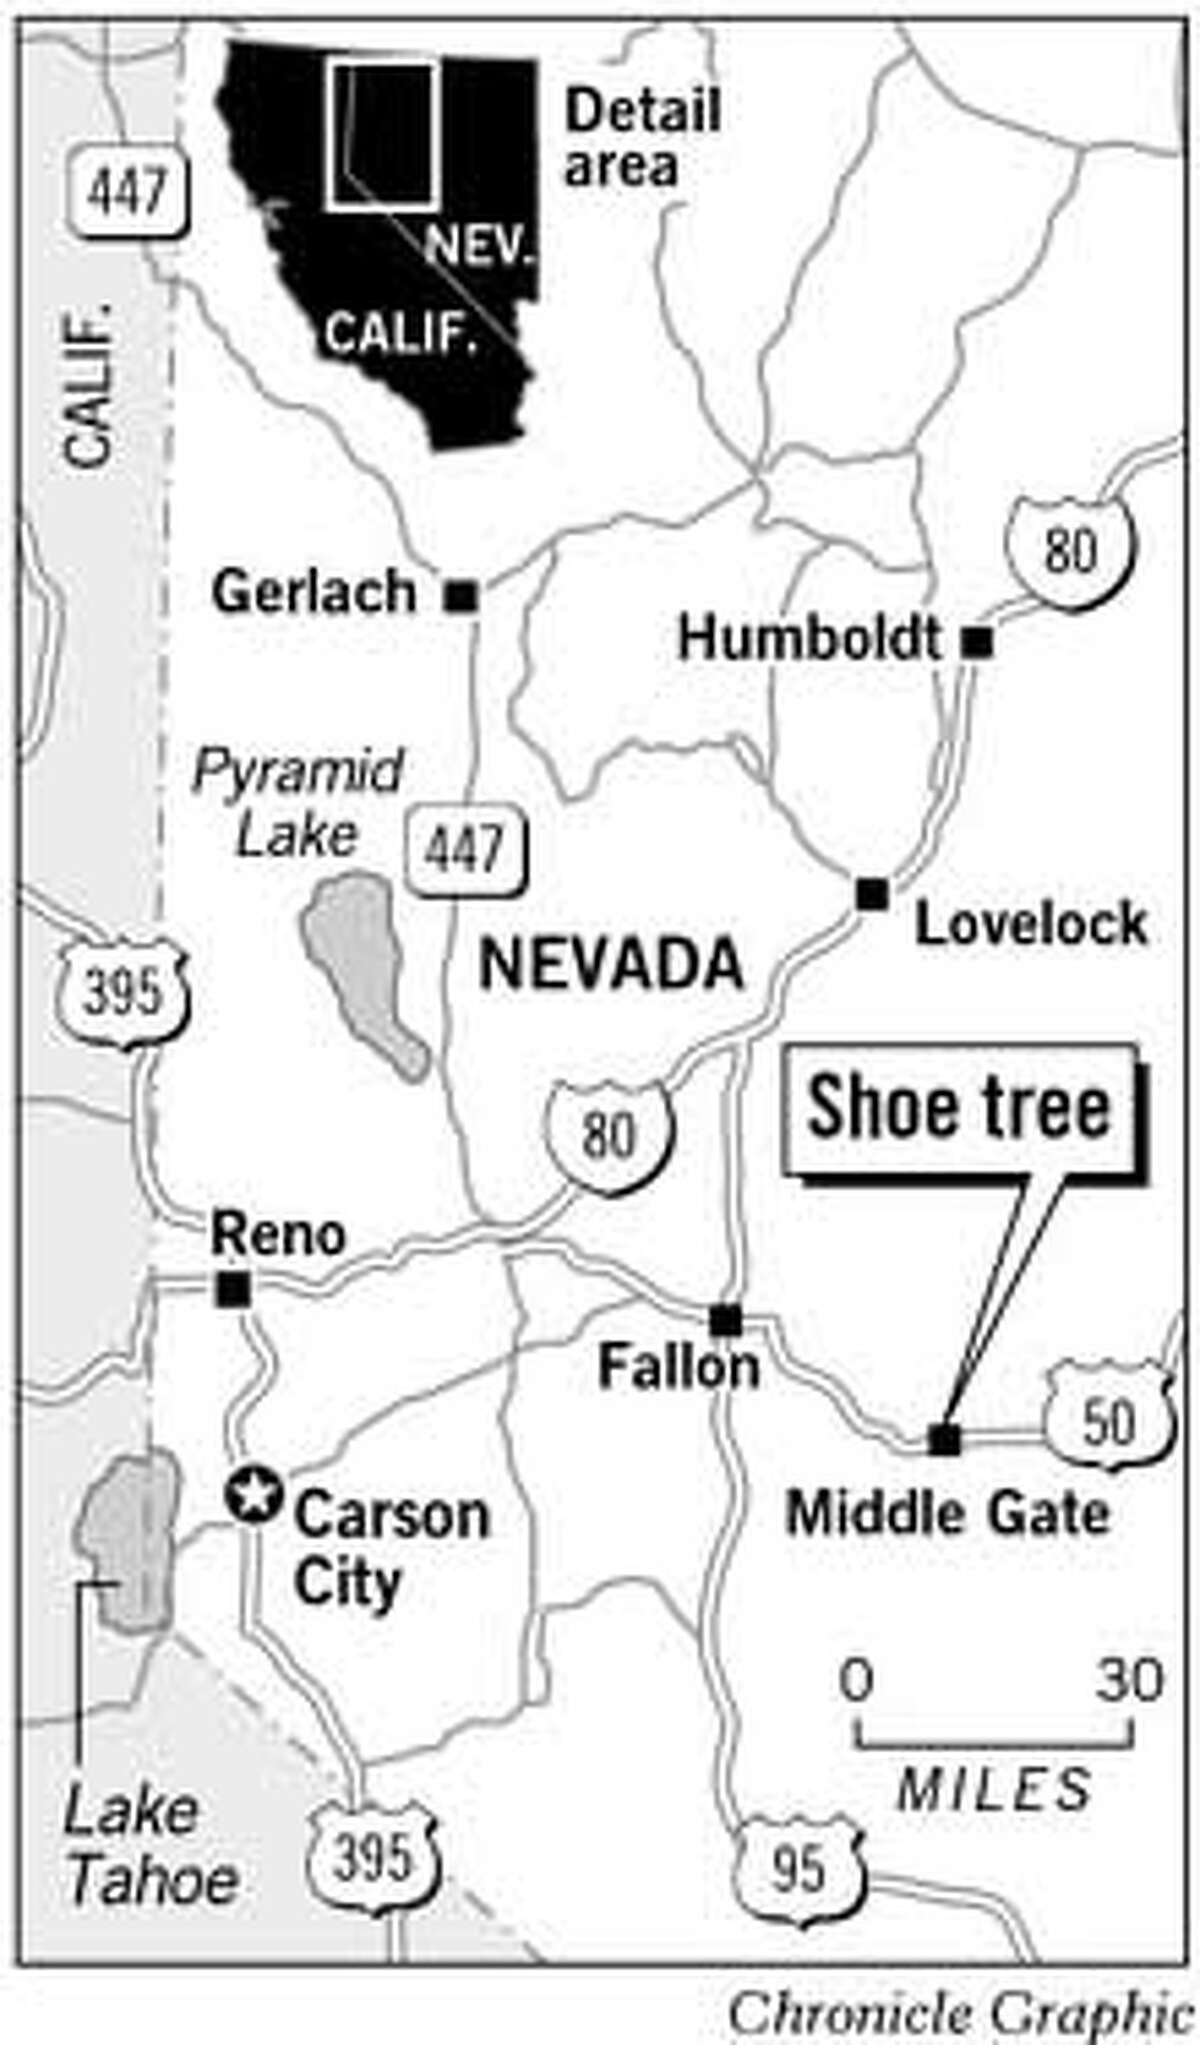 Central Nevada's Shoe Tree. Chronicle Graphic